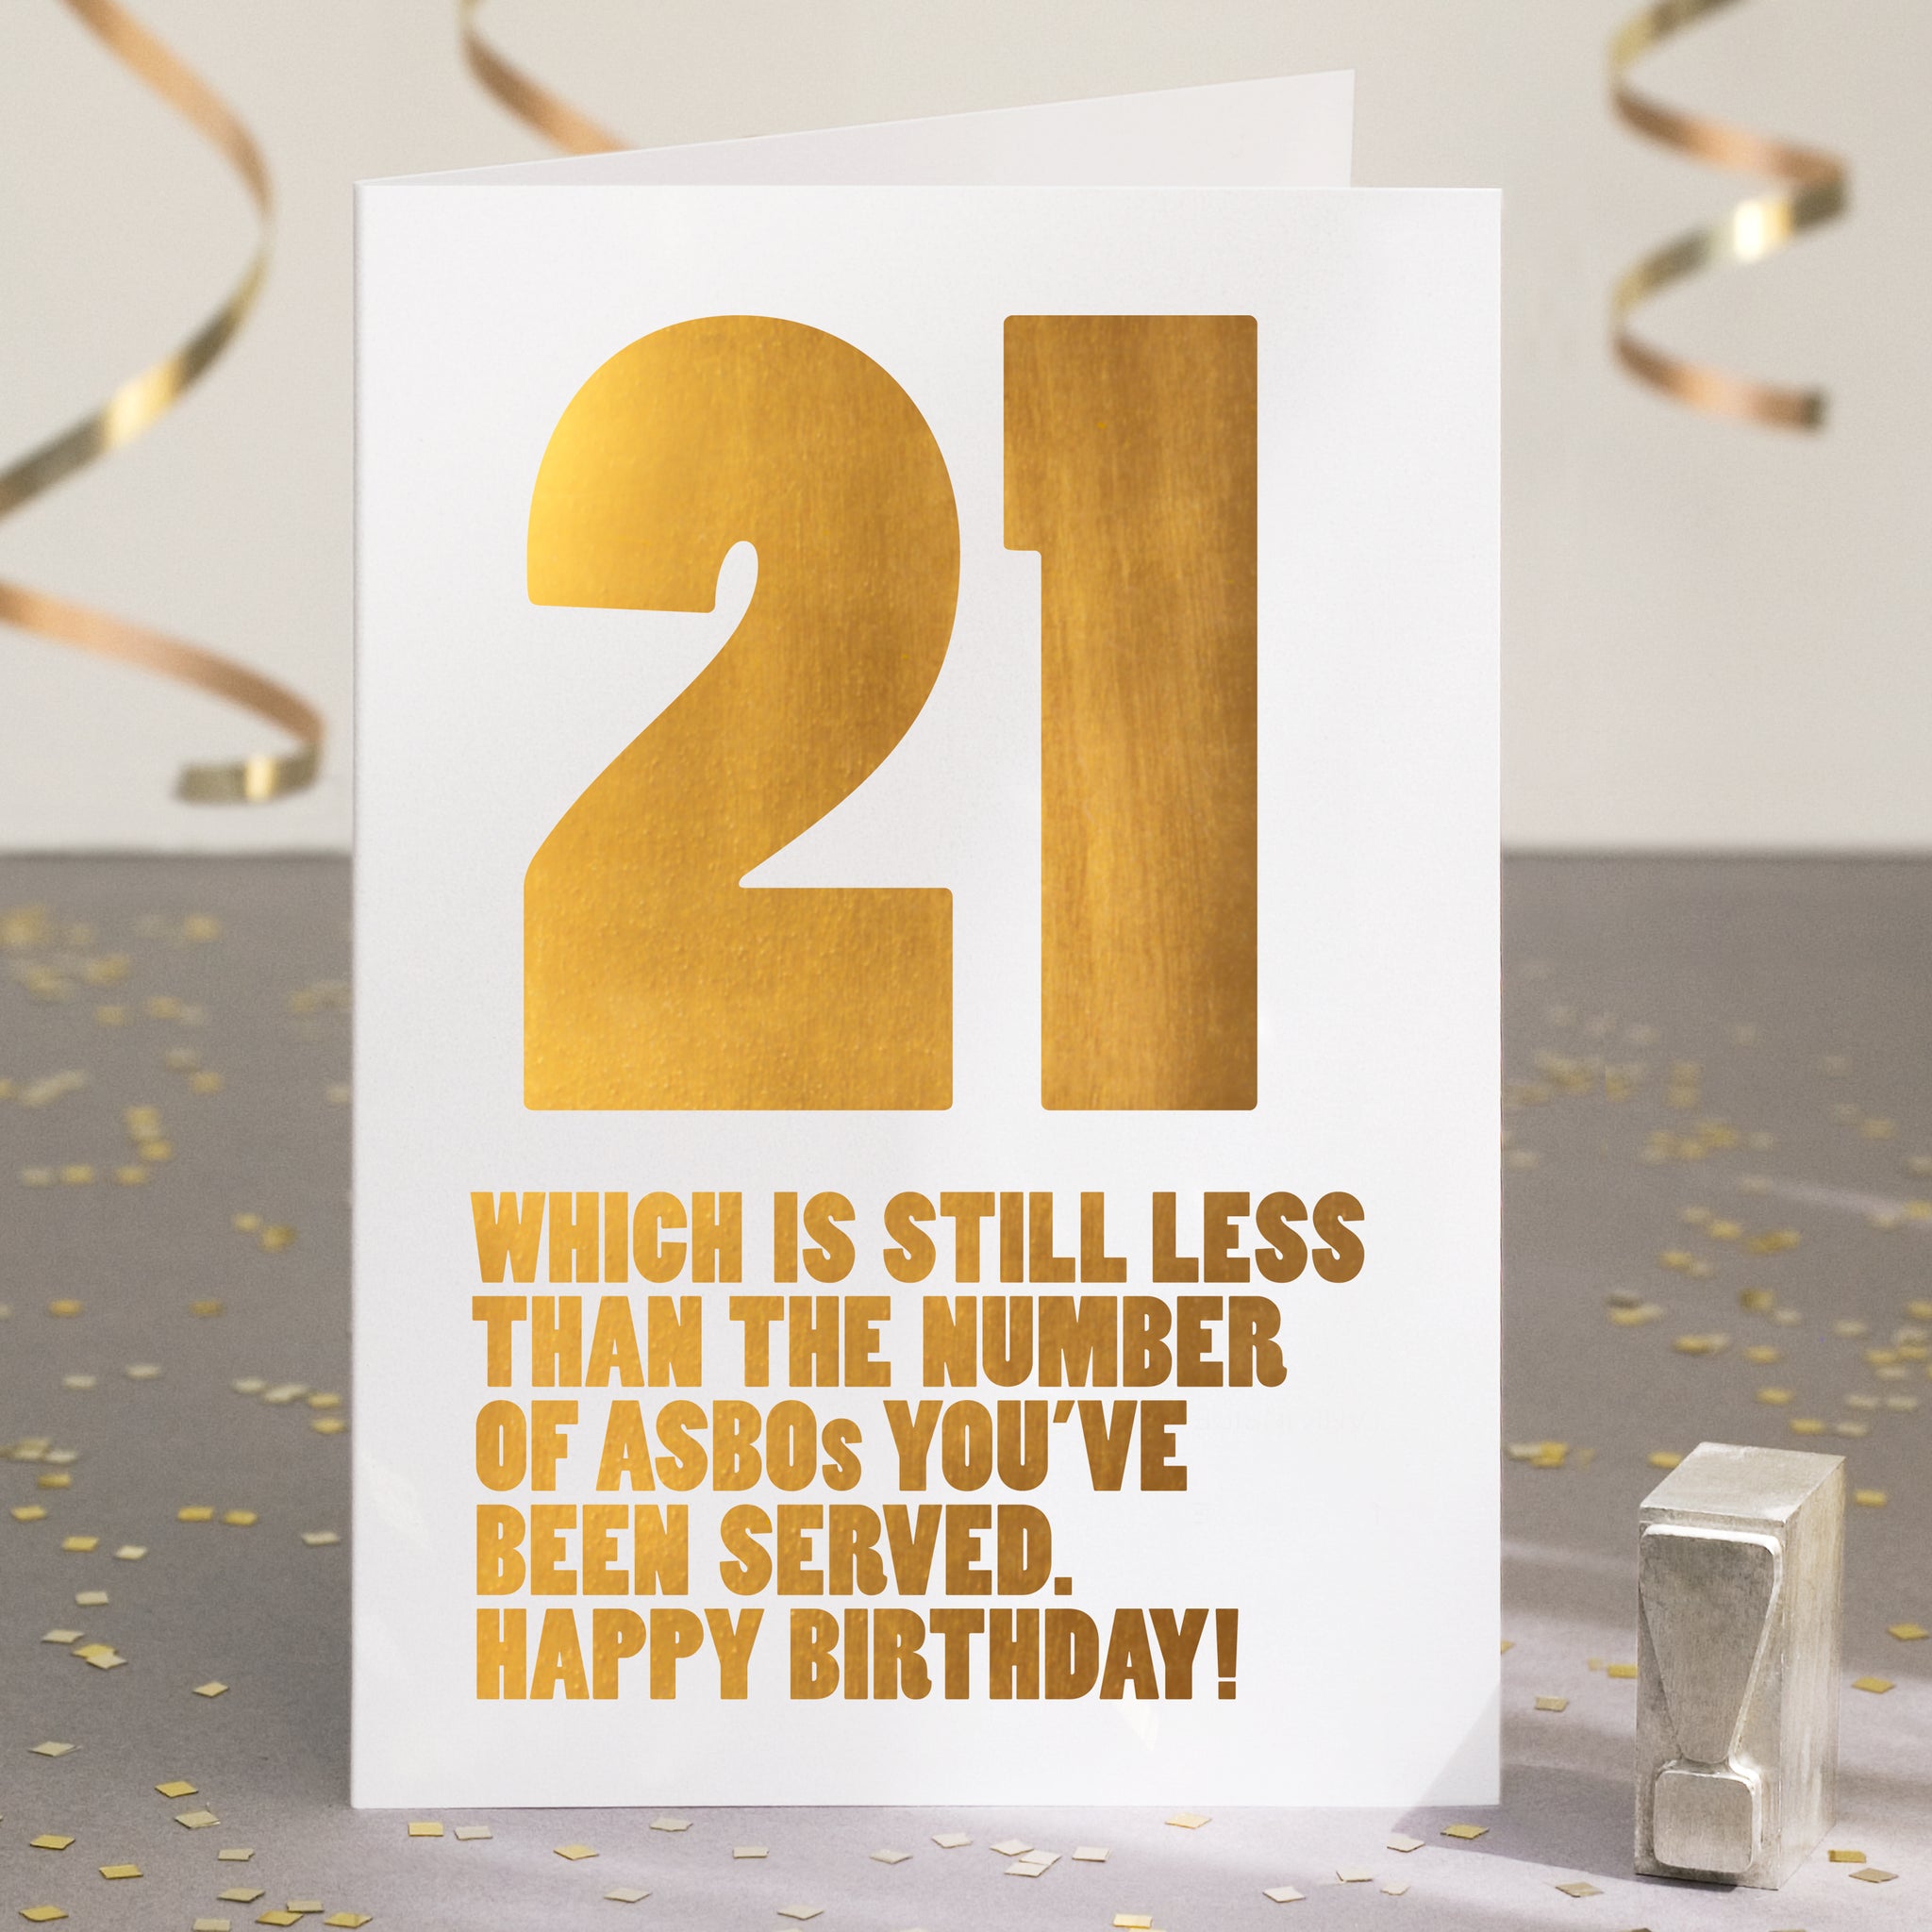 A funny 21st birthday card with the text '21, which is still less than the number of ASBOs you’ve been served'.